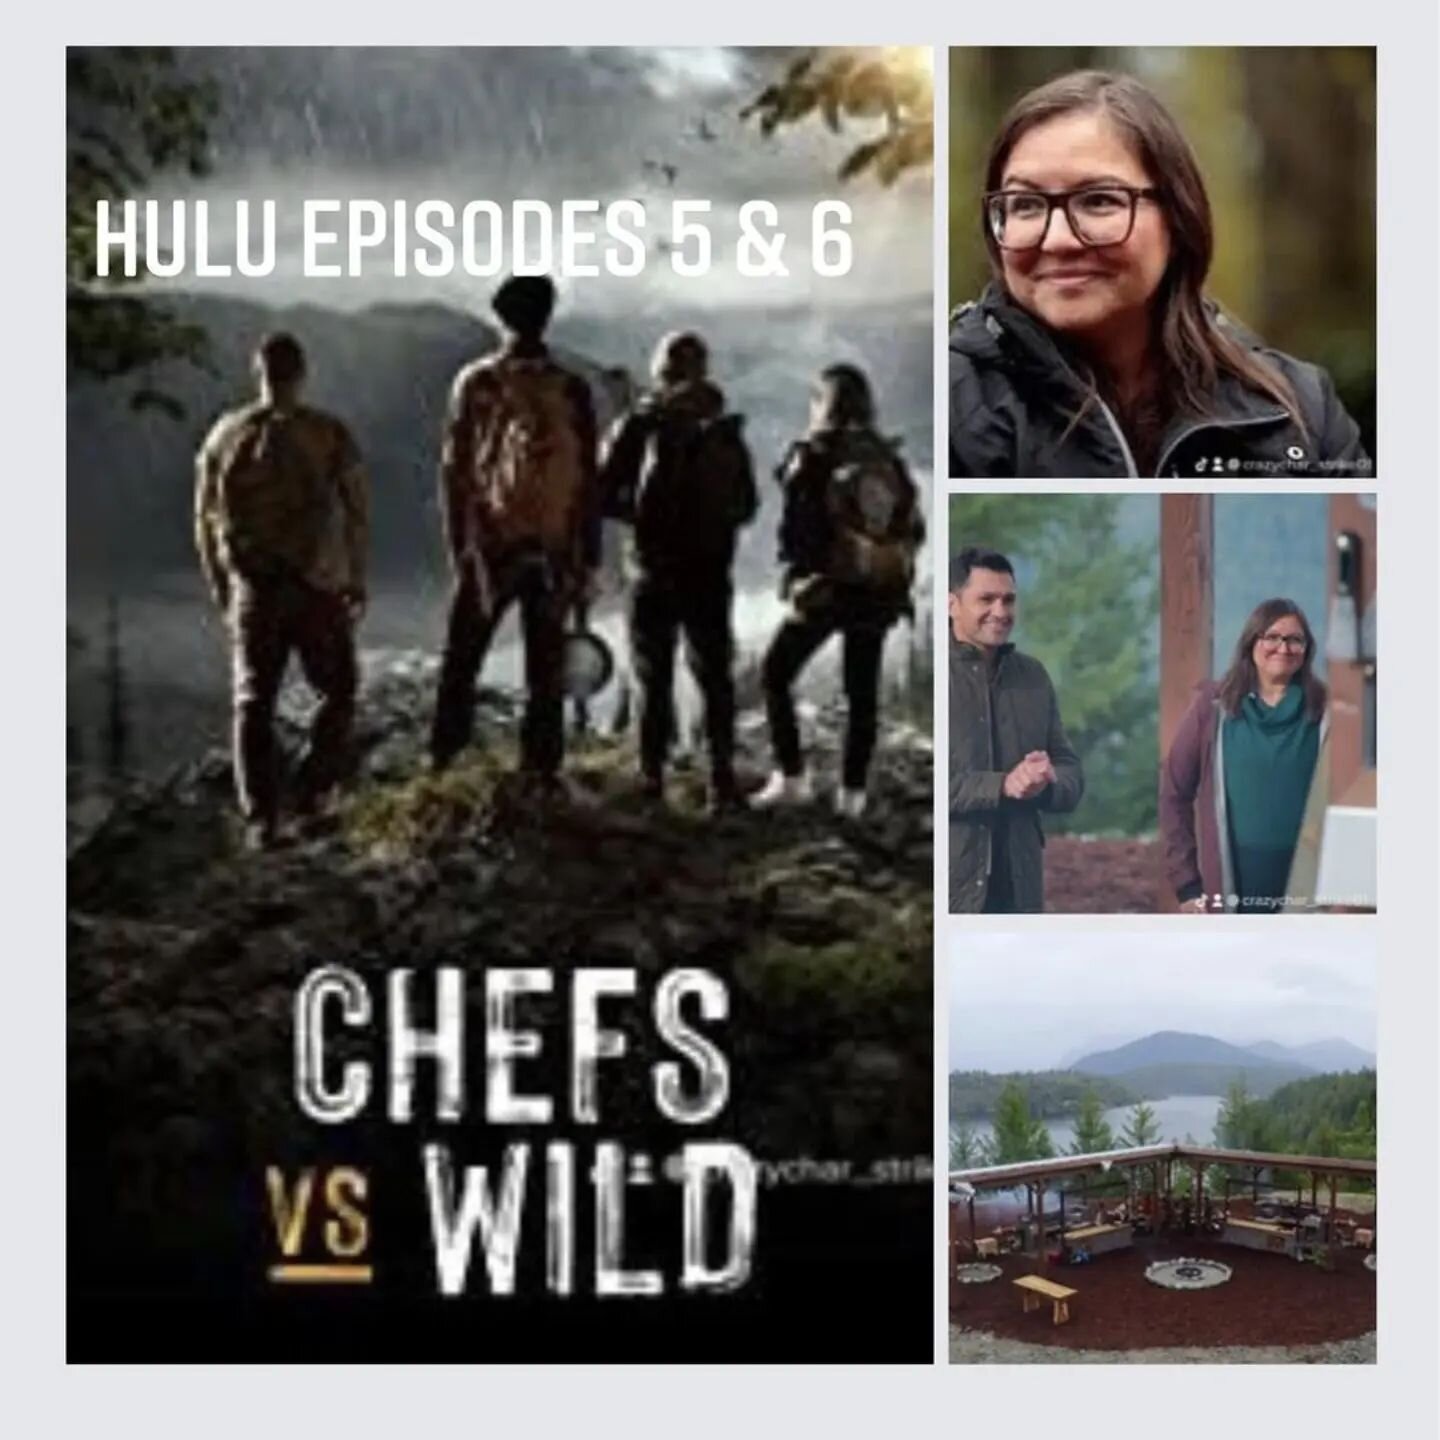 Have you checked out our very own @vsegrest on Chefs vs Wild?! #foodsovereignty #Muckleshoot @hulu